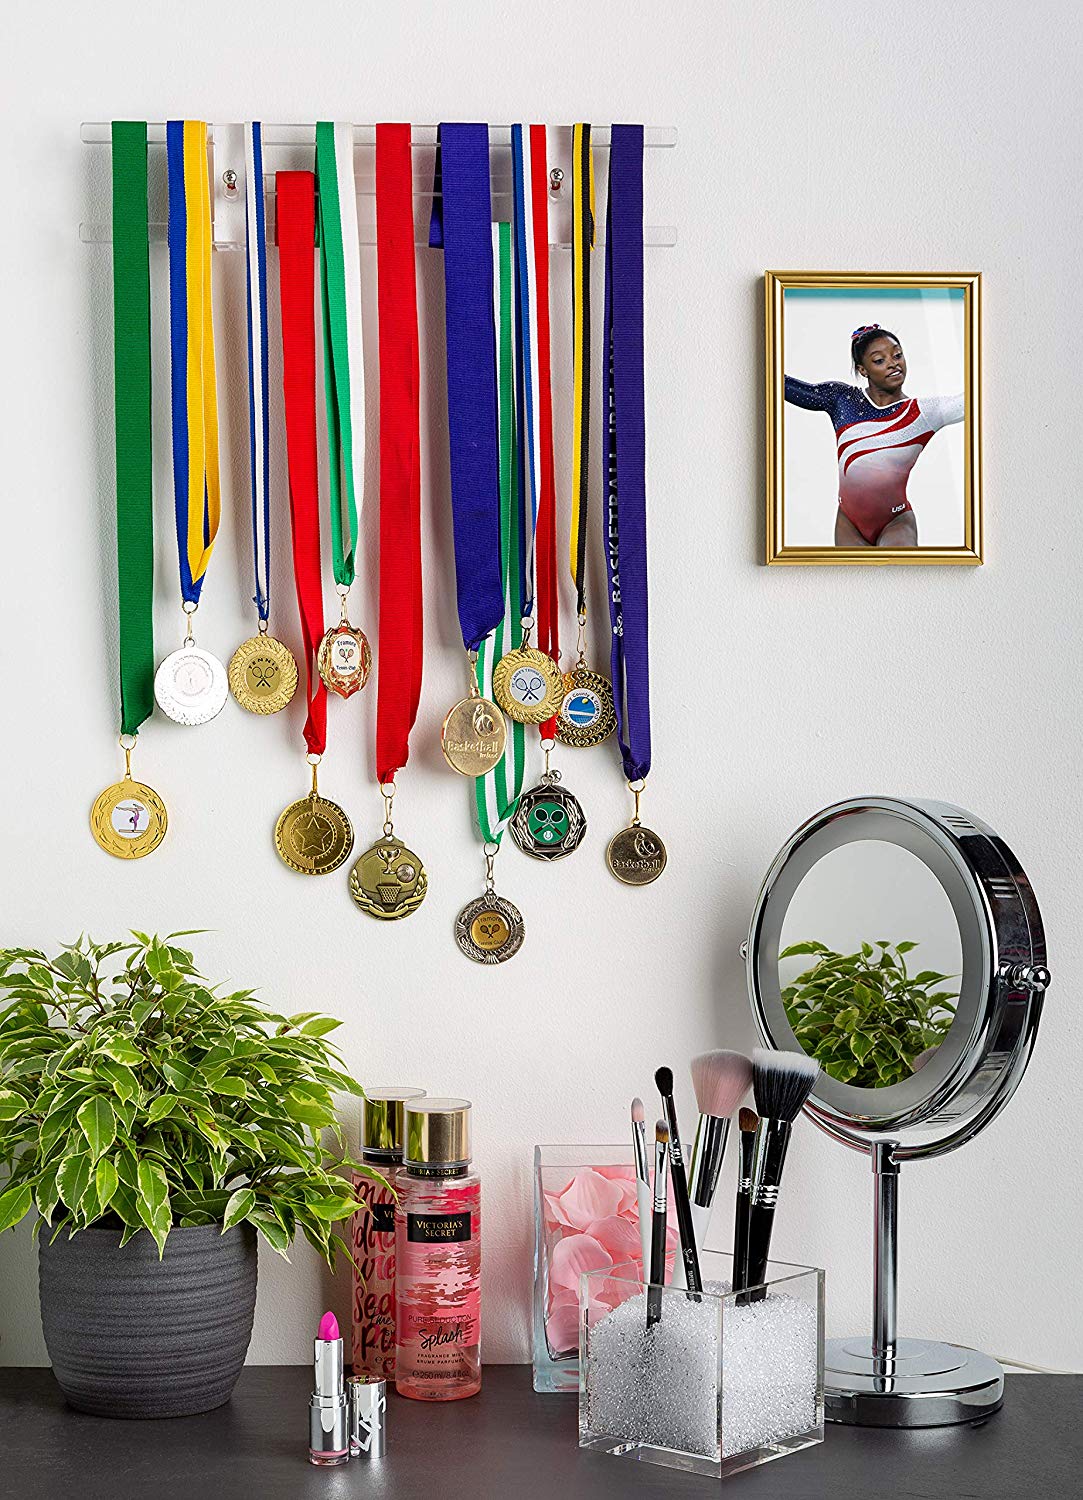 Acrylic Medal Holder Can Hold up to 30 or More Medals!